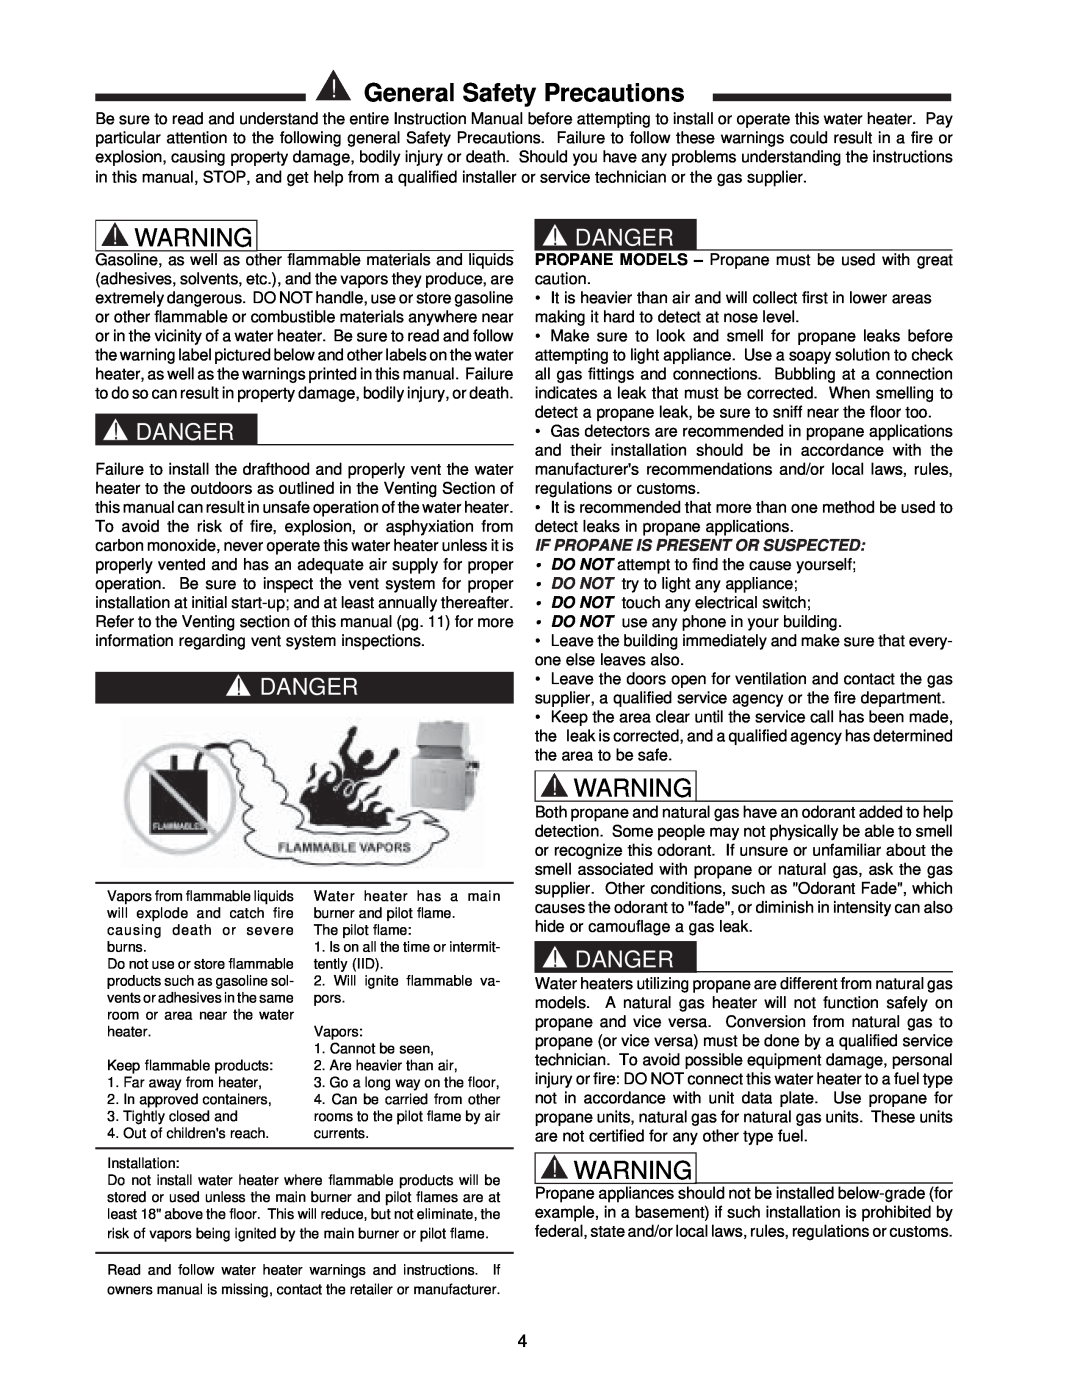 Raypak NH, 0133-4001 WH manual General Safety Precautions, Danger, If Propane Is Present Or Suspected 